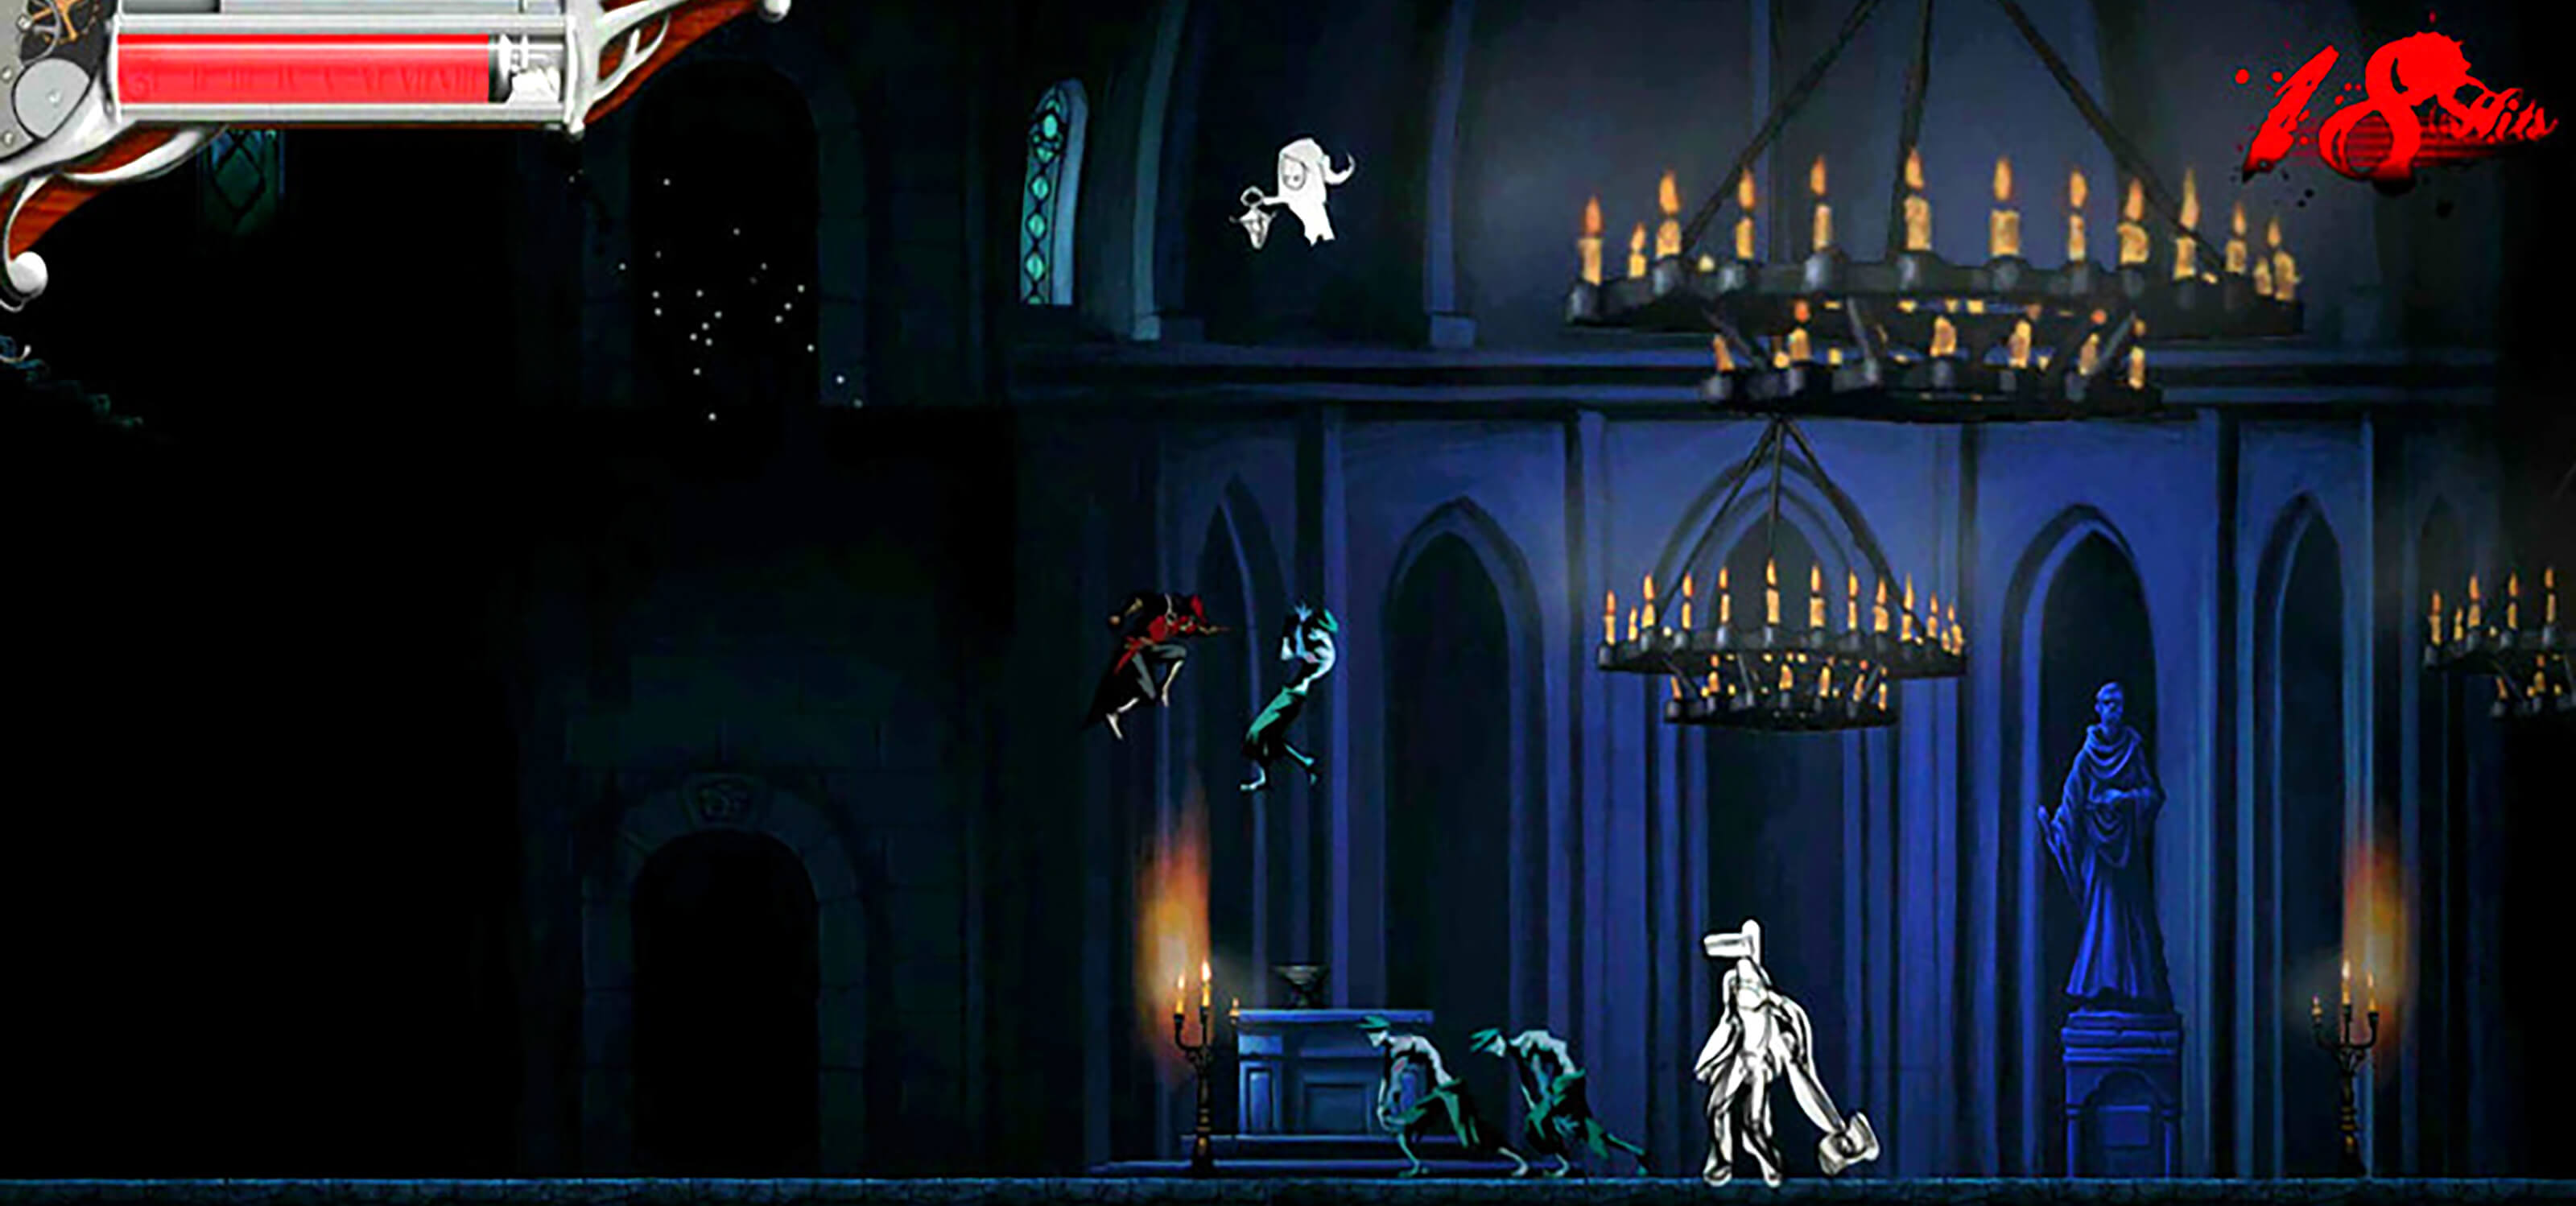 A swordsman in red fights a green zombie in midair in a spooky church